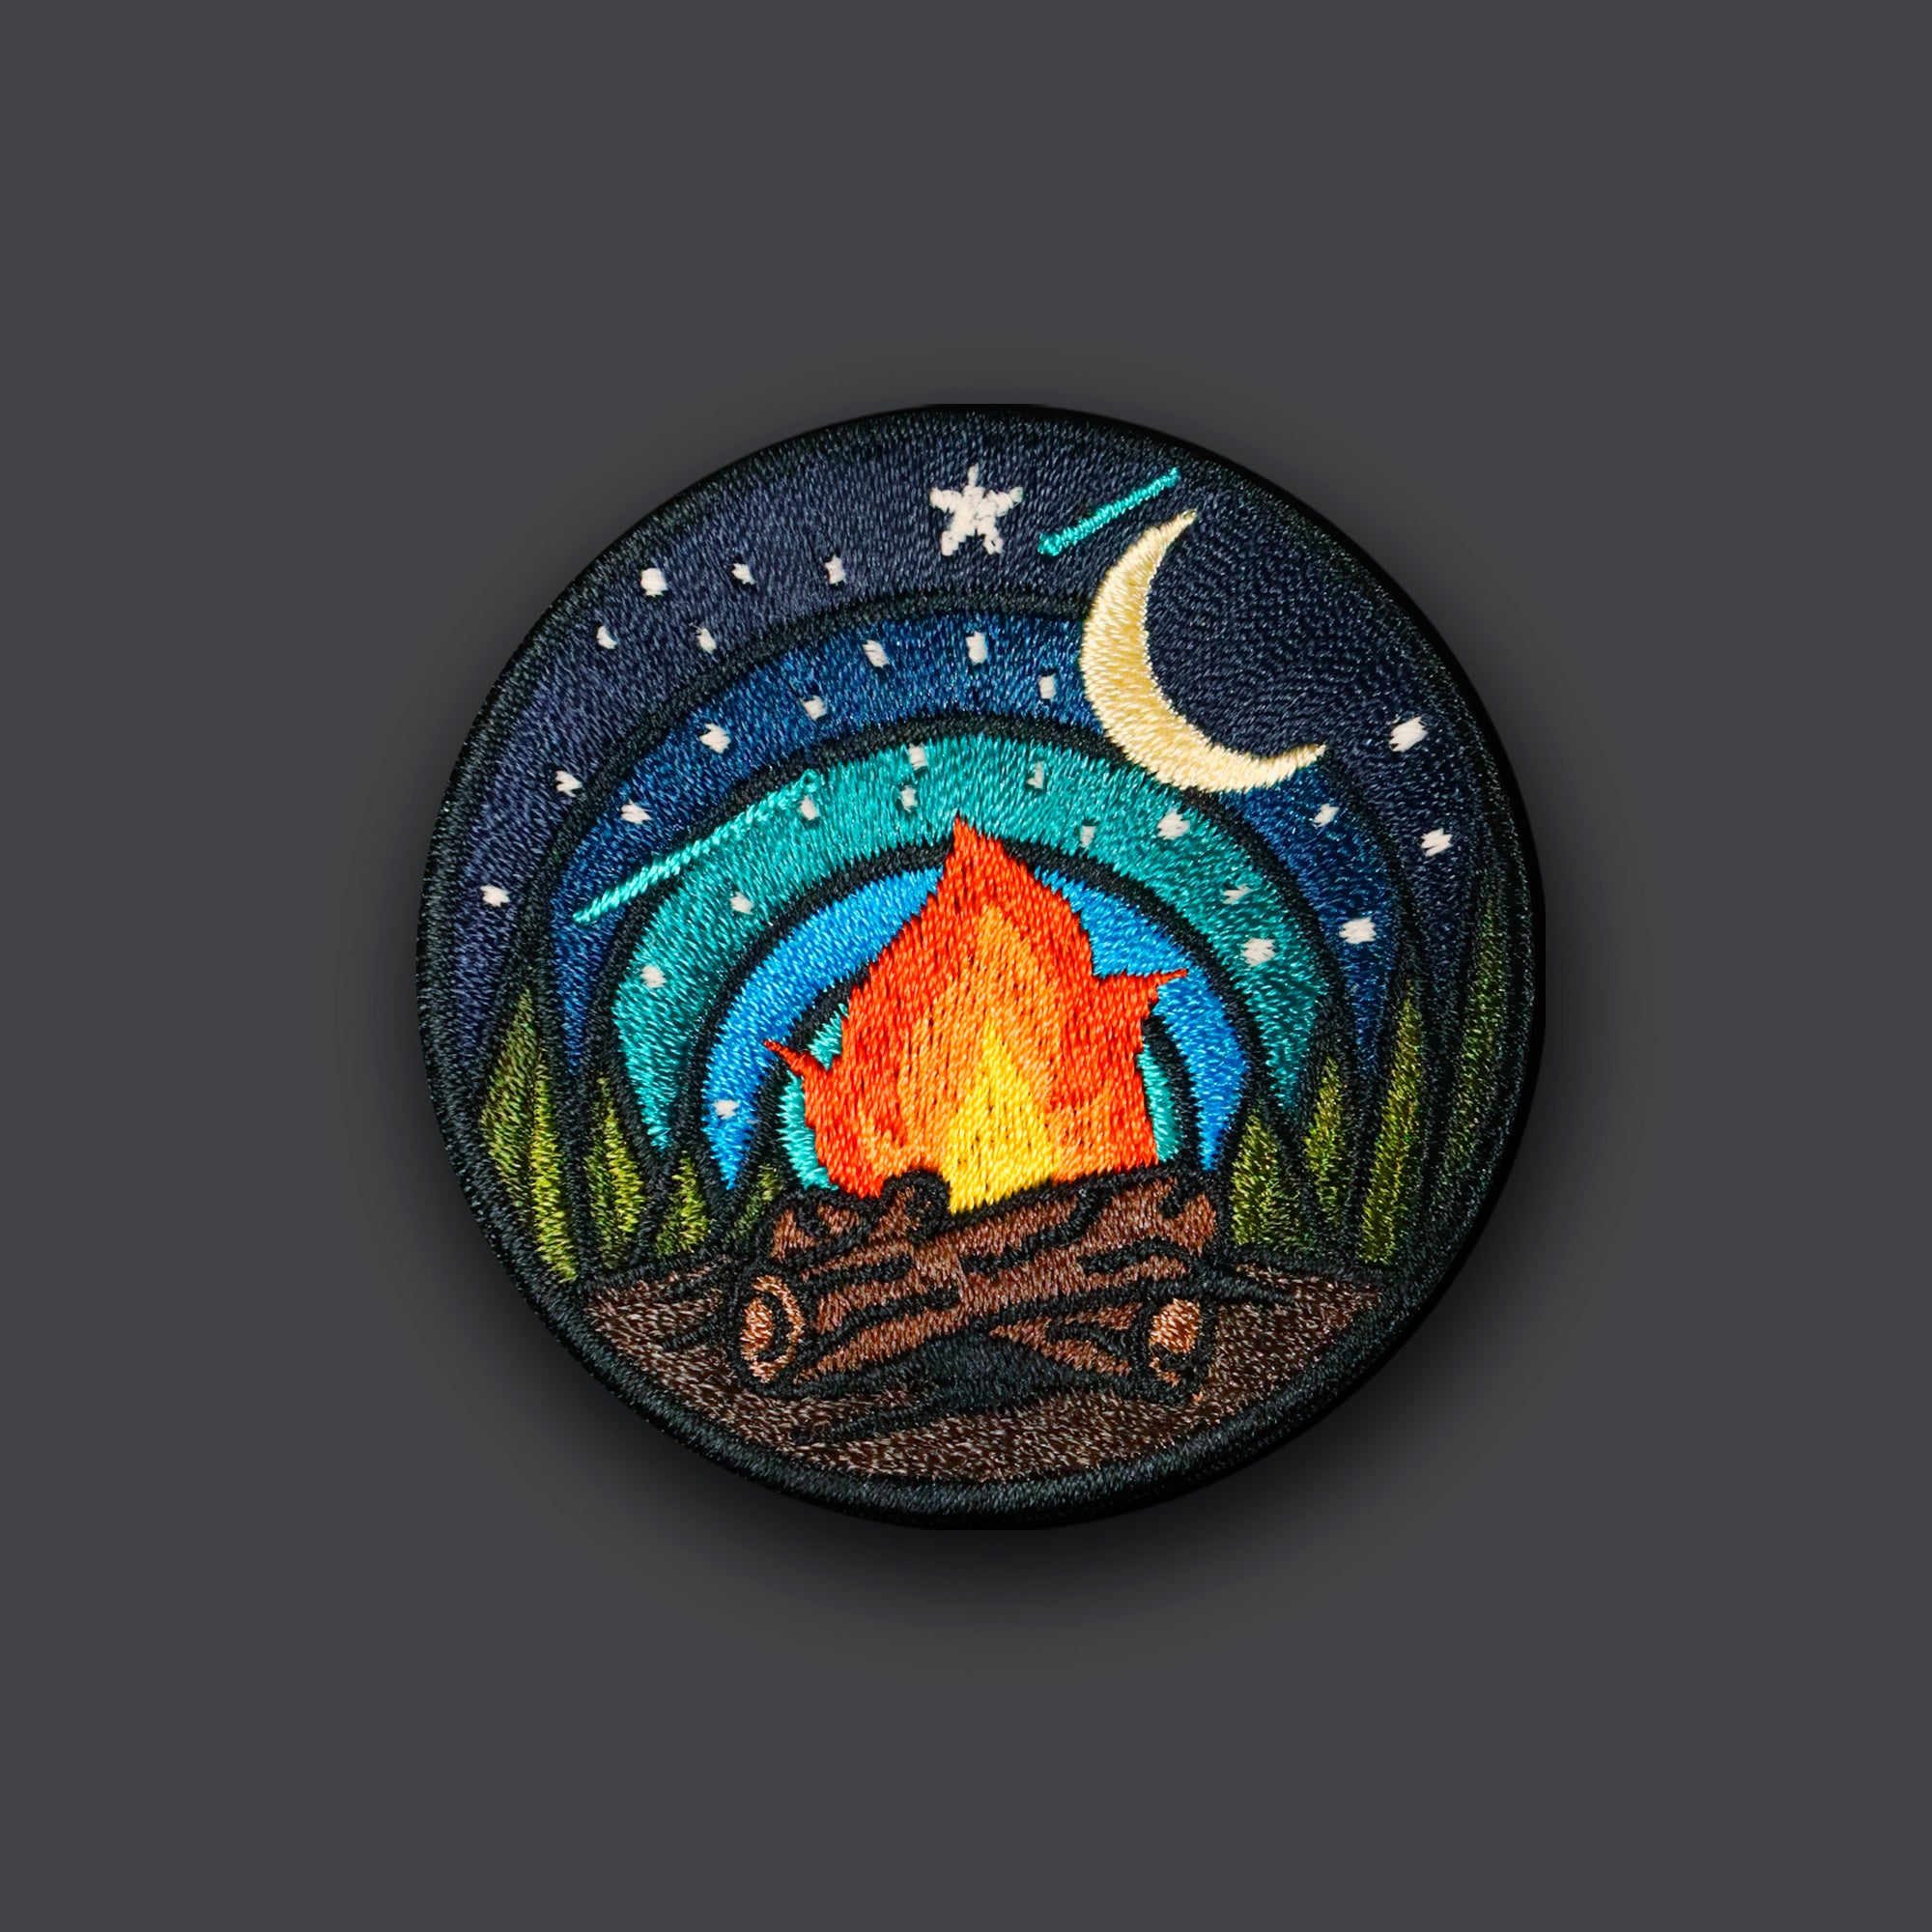 THE SIMPLE LIFE V7 "CAMPFIRE" Morale Patch